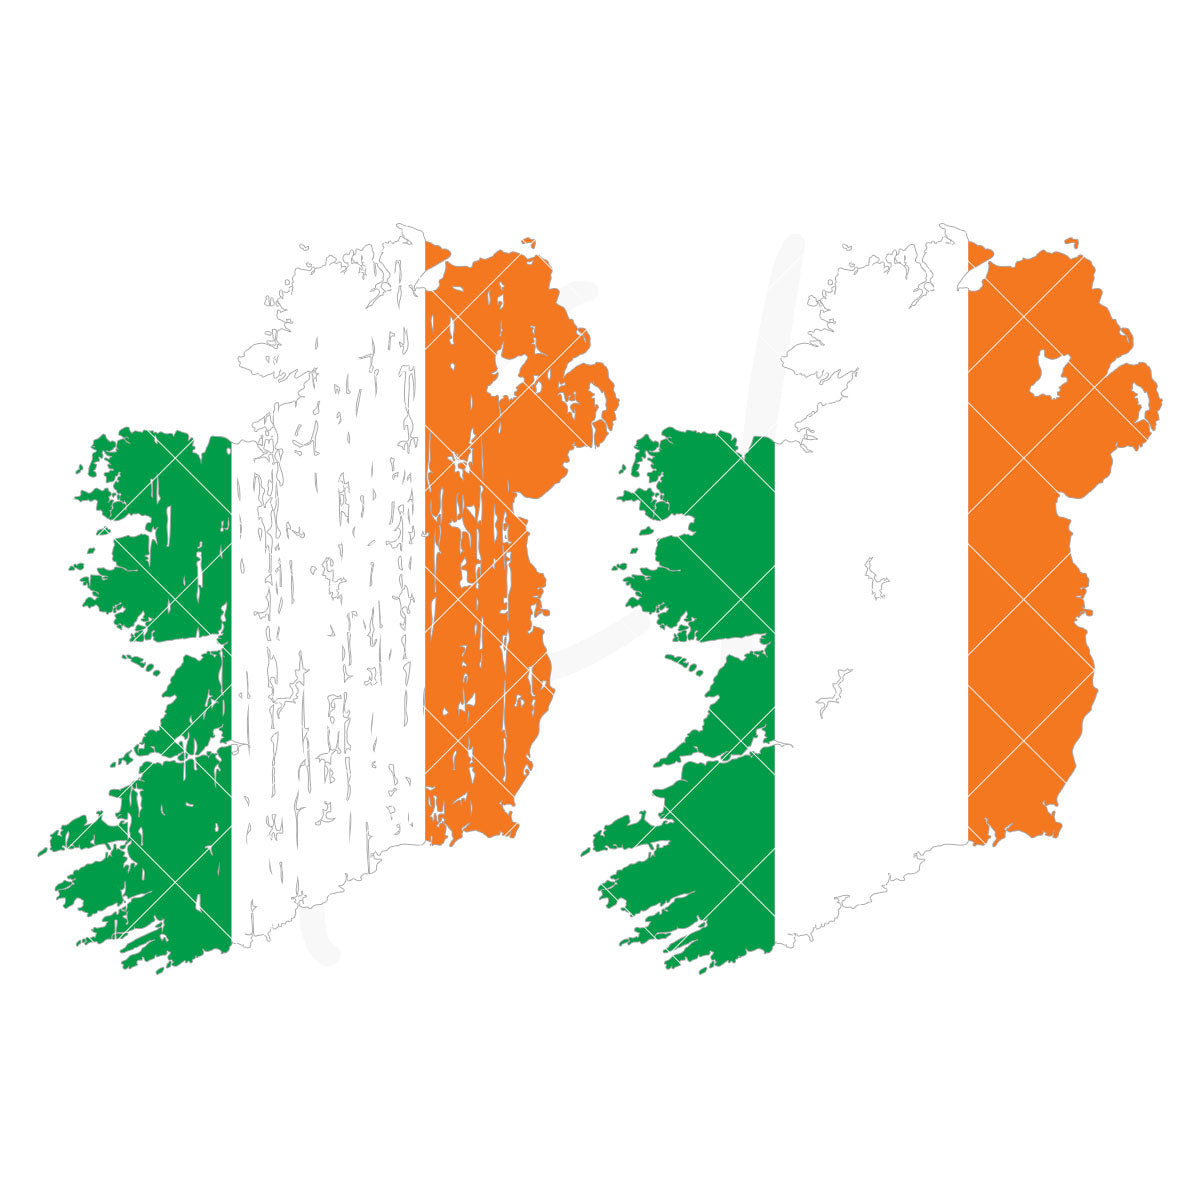 Ireland Silhouette | SVG DXF EPS PNG Cut Files